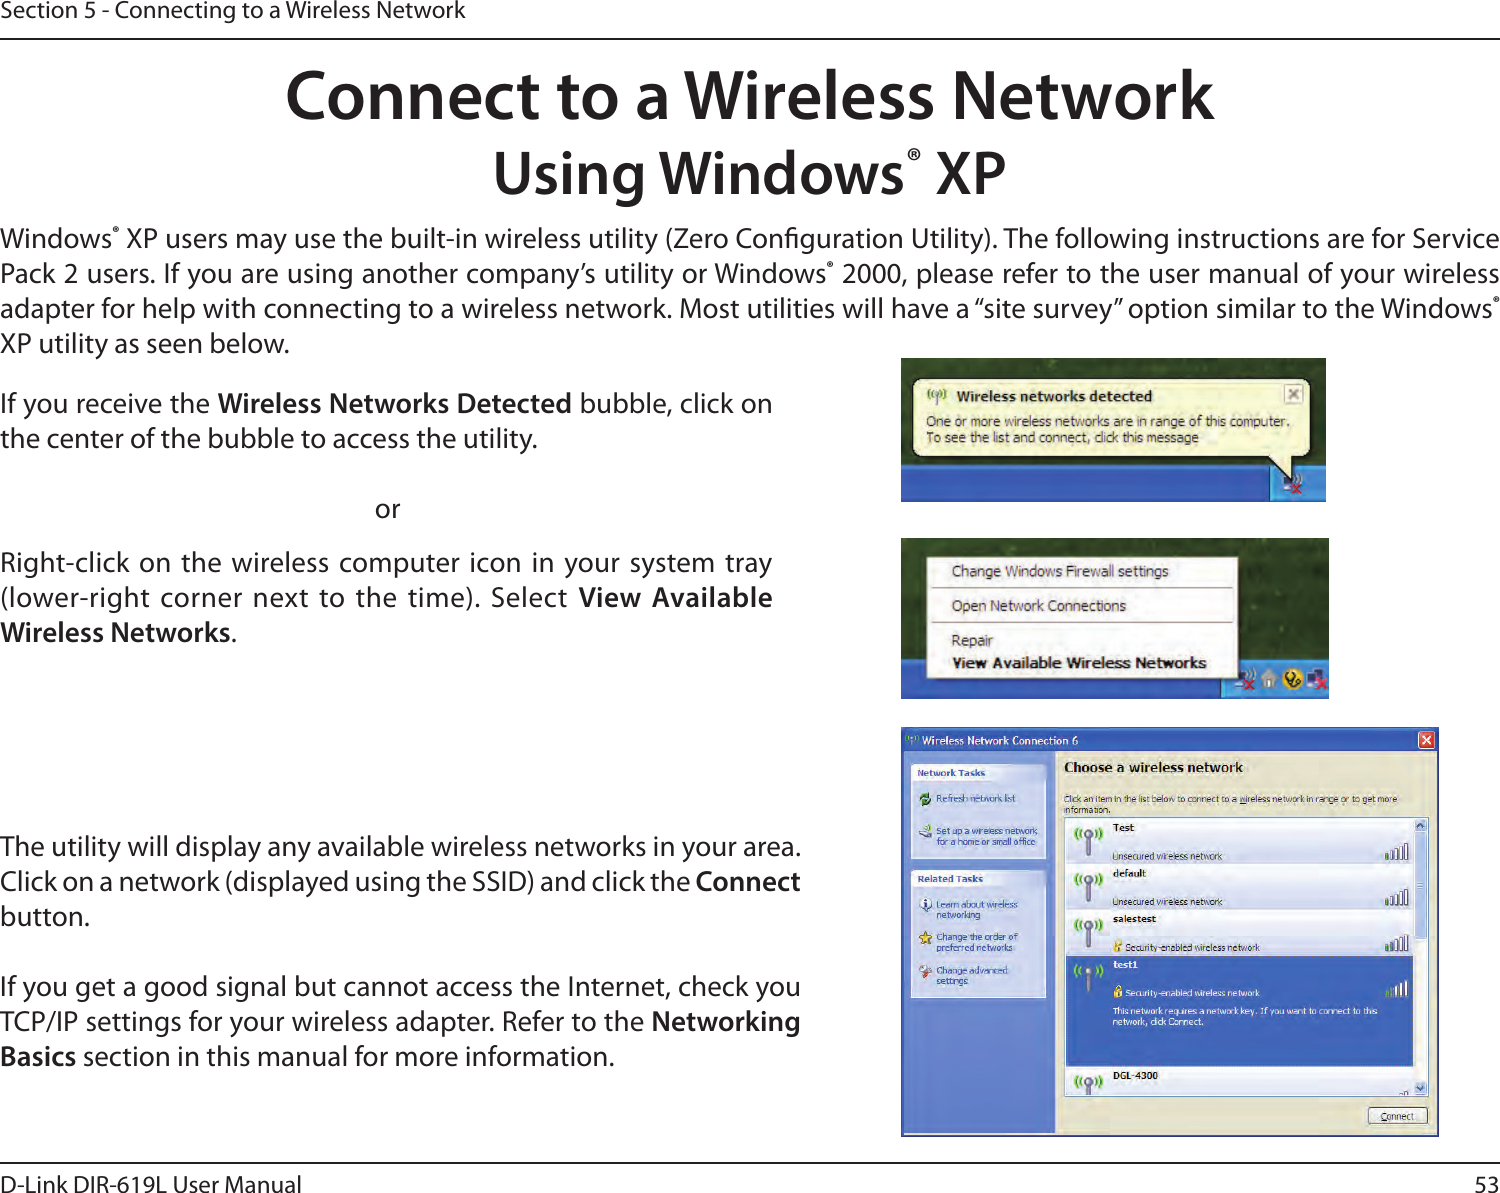 53D-Link DIR-619L User ManualSection 5 - Connecting to a Wireless NetworkConnect to a Wireless NetworkUsing Windows® XPWindows® XP users may use the built-in wireless utility (Zero Conguration Utility). The following instructions are for Service Pack 2 users. If you are using another company’s utility or Windows® 2000, please refer to the user manual of your wireless adapter for help with connecting to a wireless network. Most utilities will have a “site survey” option similar to the Windows® XP utility as seen below.Right-click on  the wireless computer icon in your system tray (lower-right corner next to  the time). Select  View Available Wireless Networks.If you receive the Wireless Networks Detected bubble, click on the center of the bubble to access the utility.     orThe utility will display any available wireless networks in your area. Click on a network (displayed using the SSID) and click the Connect button.If you get a good signal but cannot access the Internet, check you TCP/IP settings for your wireless adapter. Refer to the Networking Basics section in this manual for more information.